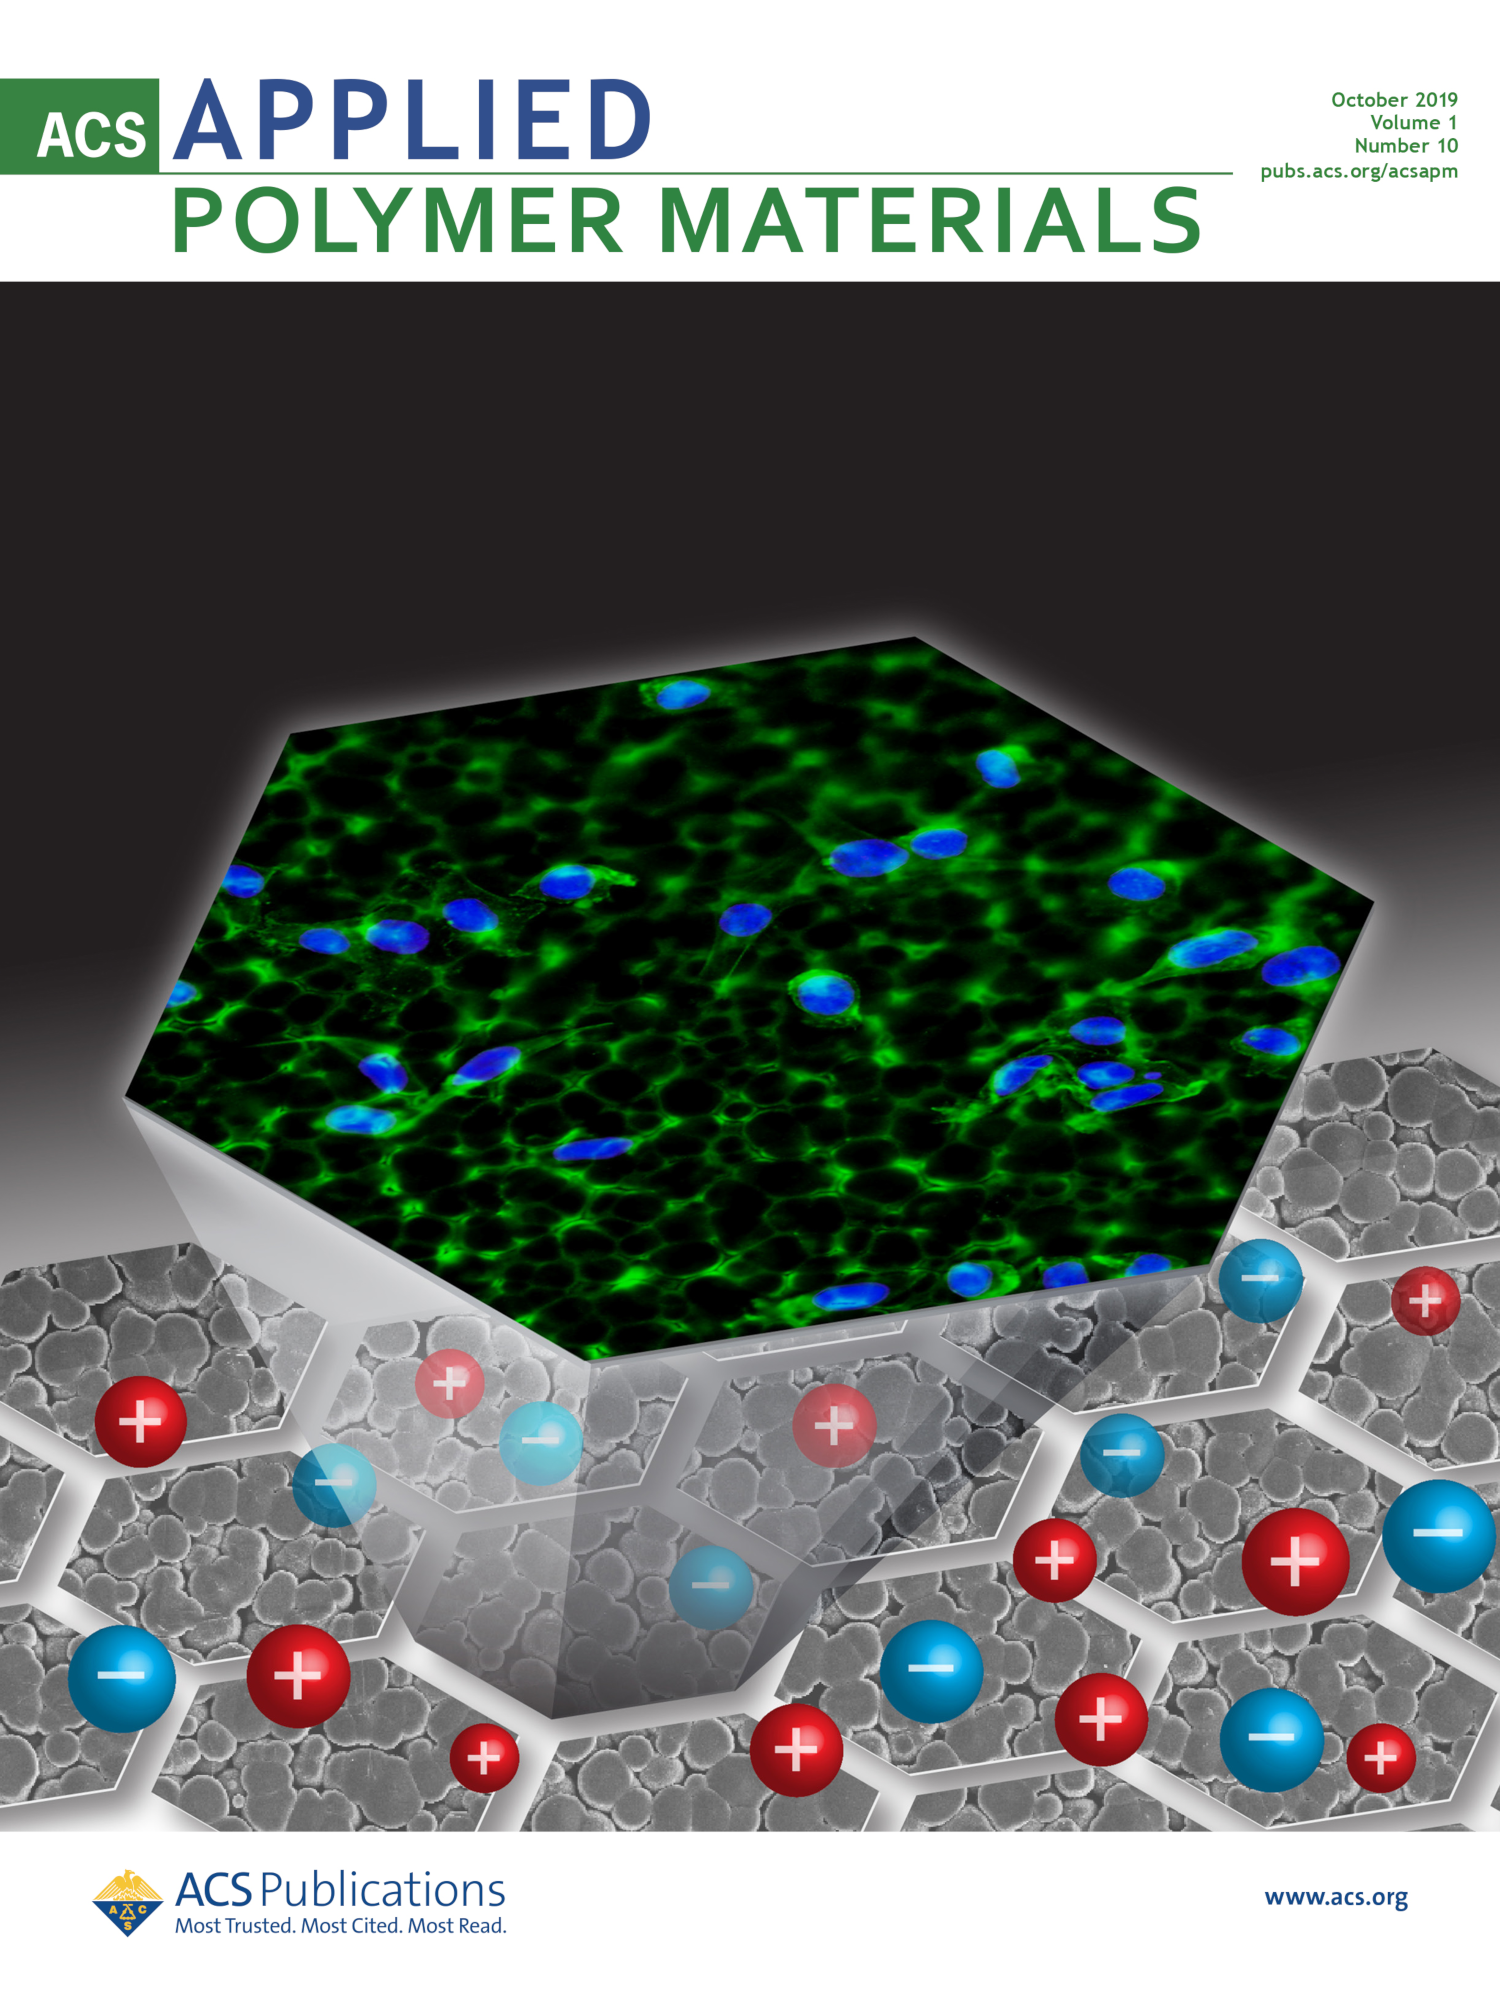 New cover on ACS Applied Polymer Materials